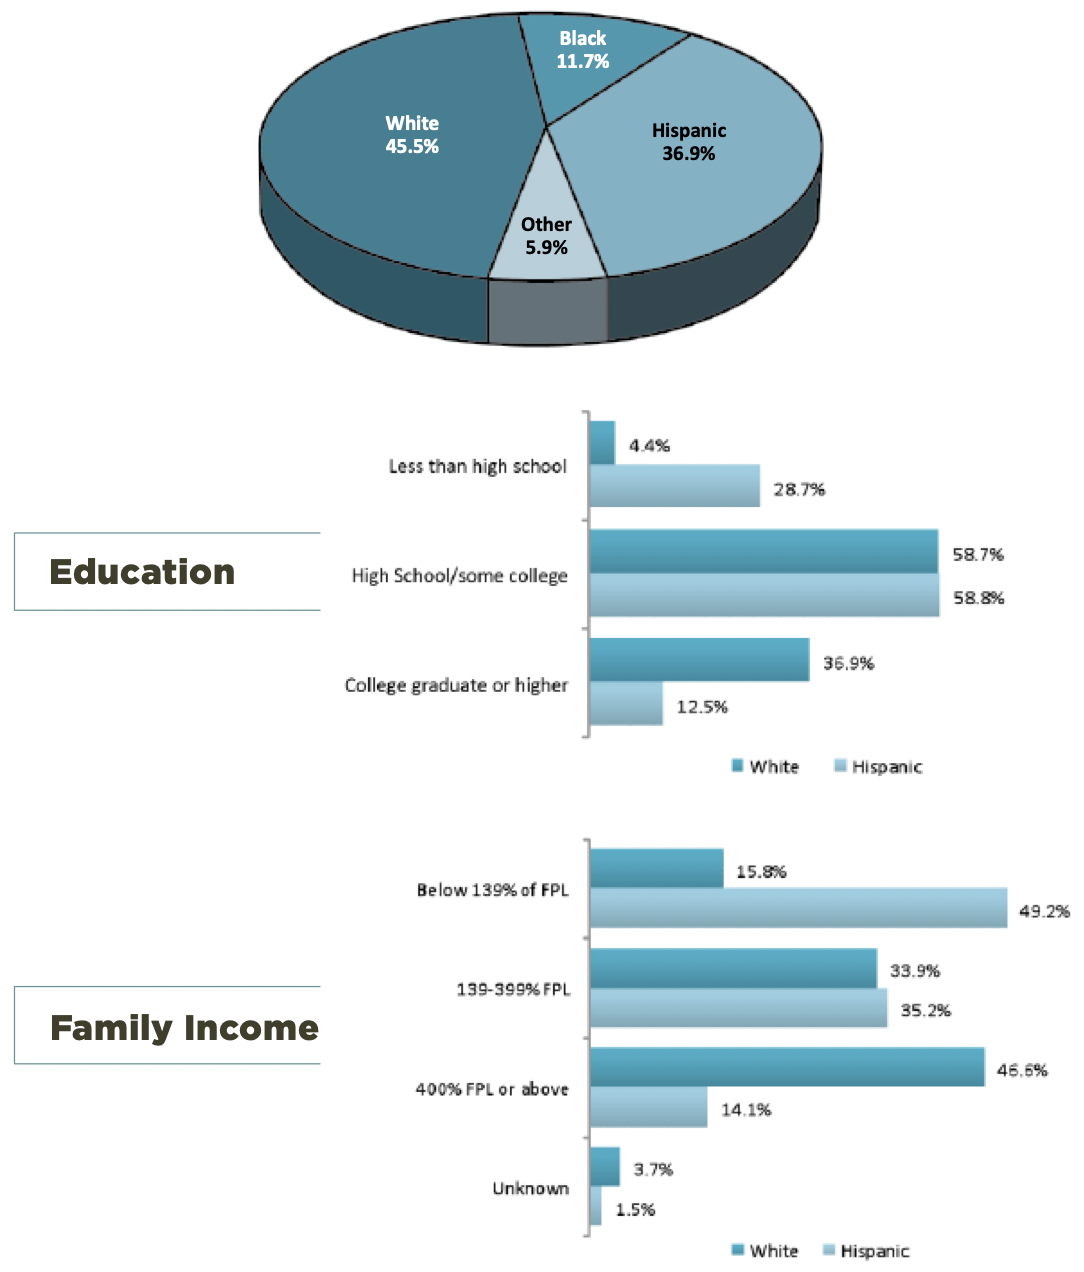 These graphs compare race, education, and family income of survey participants.